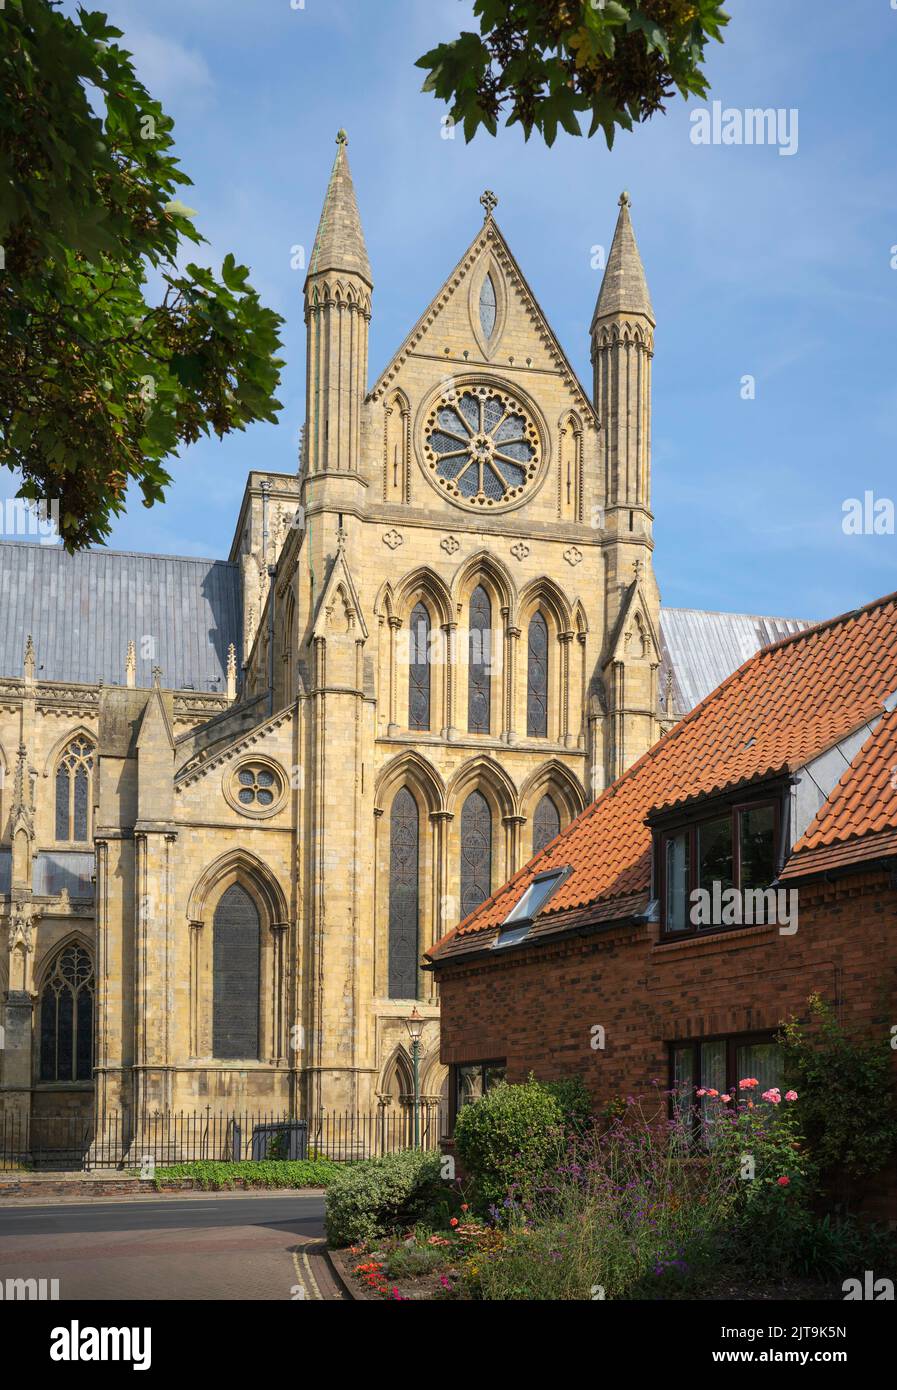 The ancient minster flanked by trees under a blue sky with hazy clouds on a bright summer day in Beverley, Yorkshire, UK. Stock Photo